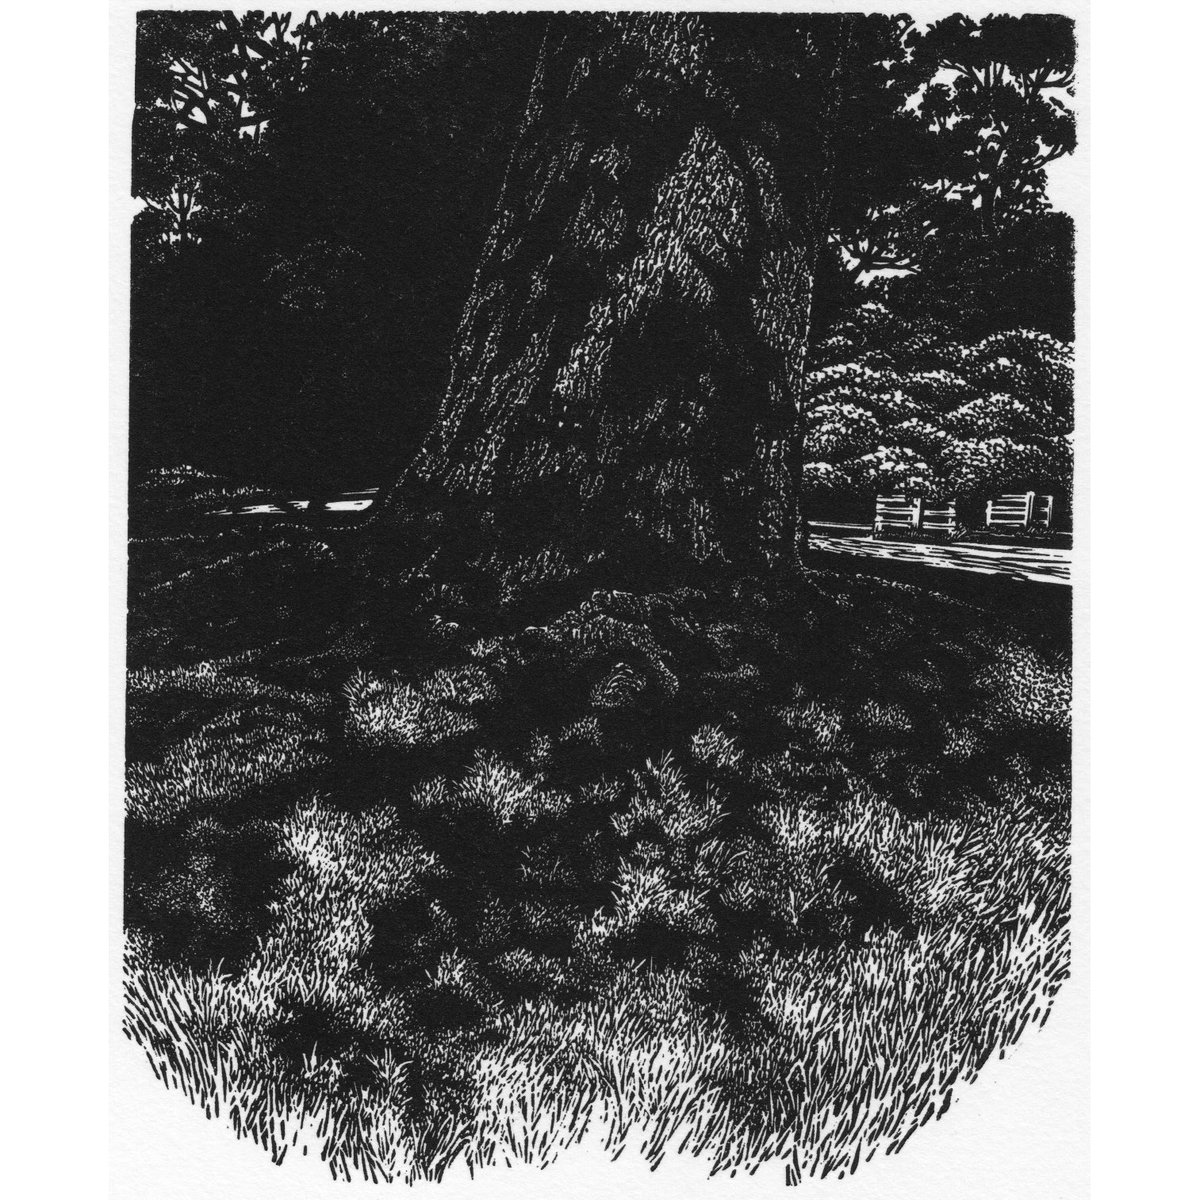 Blaze Cyan - Dappled Oak at Petworth- from the 86th SWE Annual Exhibition at Northern Print in Newcastle until April 26th. Engravings are available from our website. societyofwoodengravers.co.uk #printmaking #woodengraving